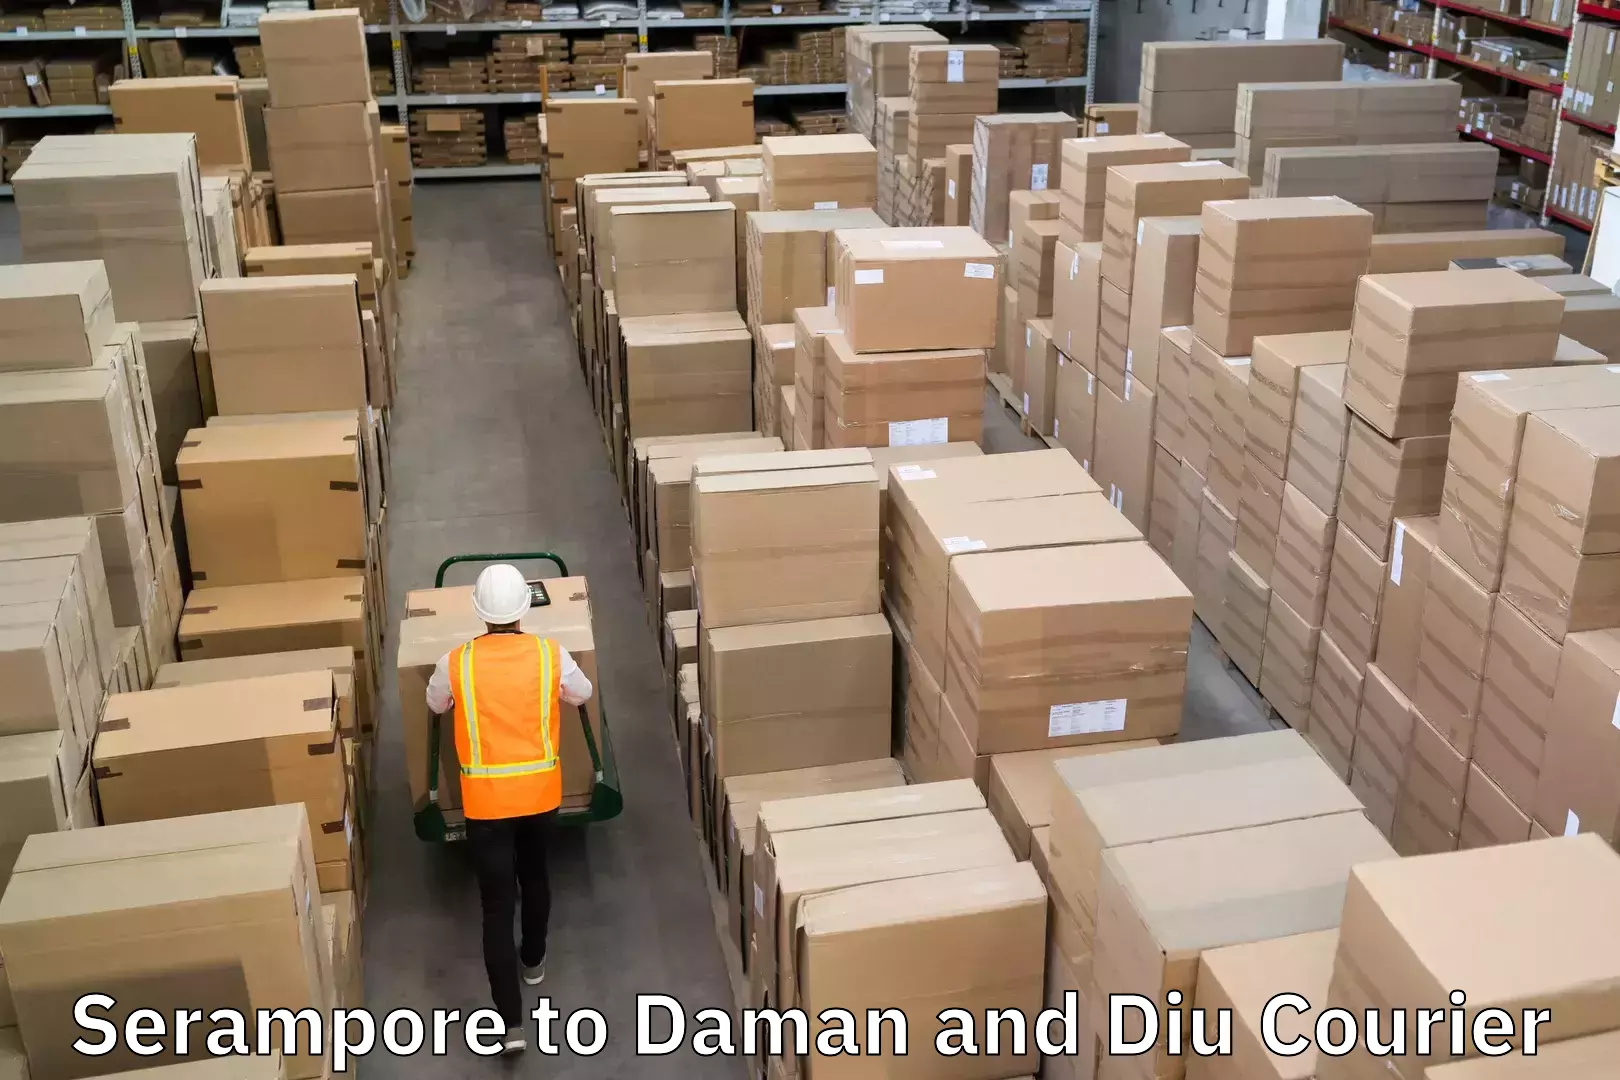 Specialized courier services Serampore to Daman and Diu